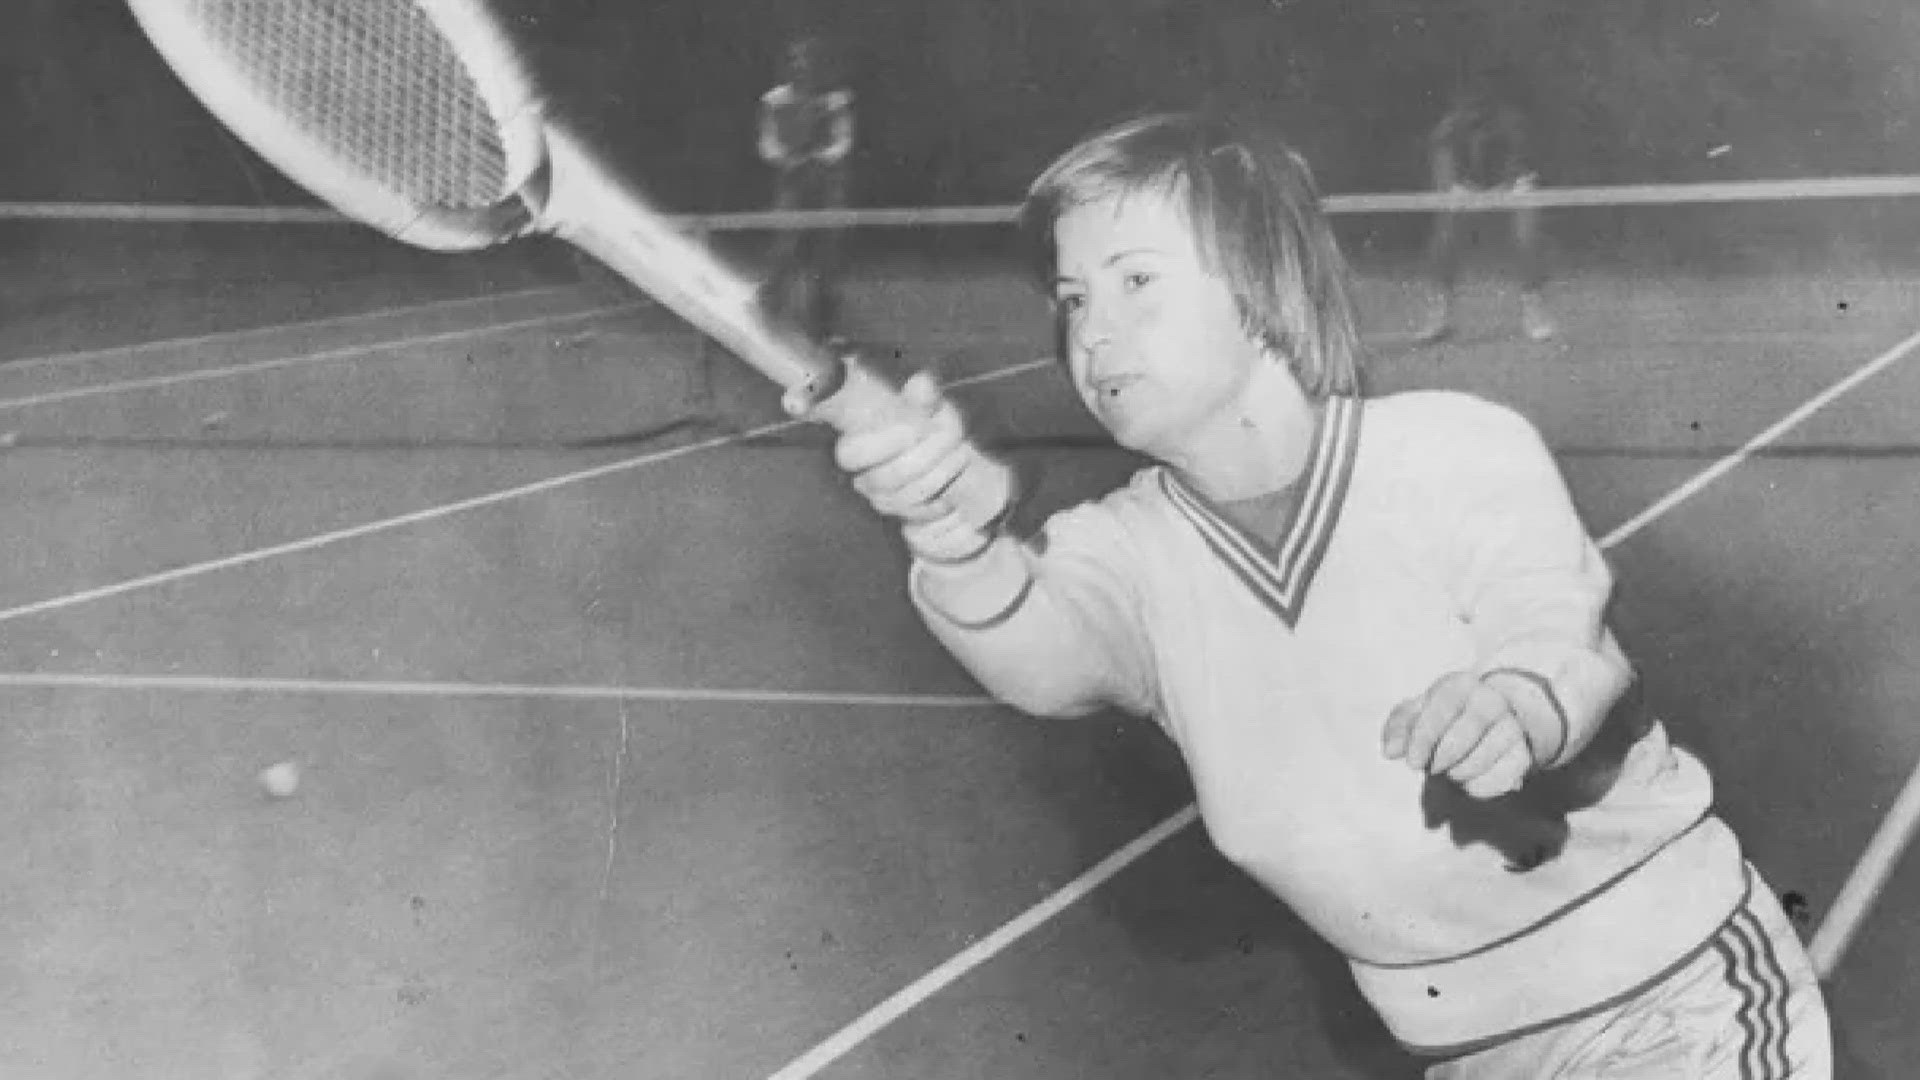 Sheila McInerney is well-known in the tennis world and has been coaching at ASU for 40 years.